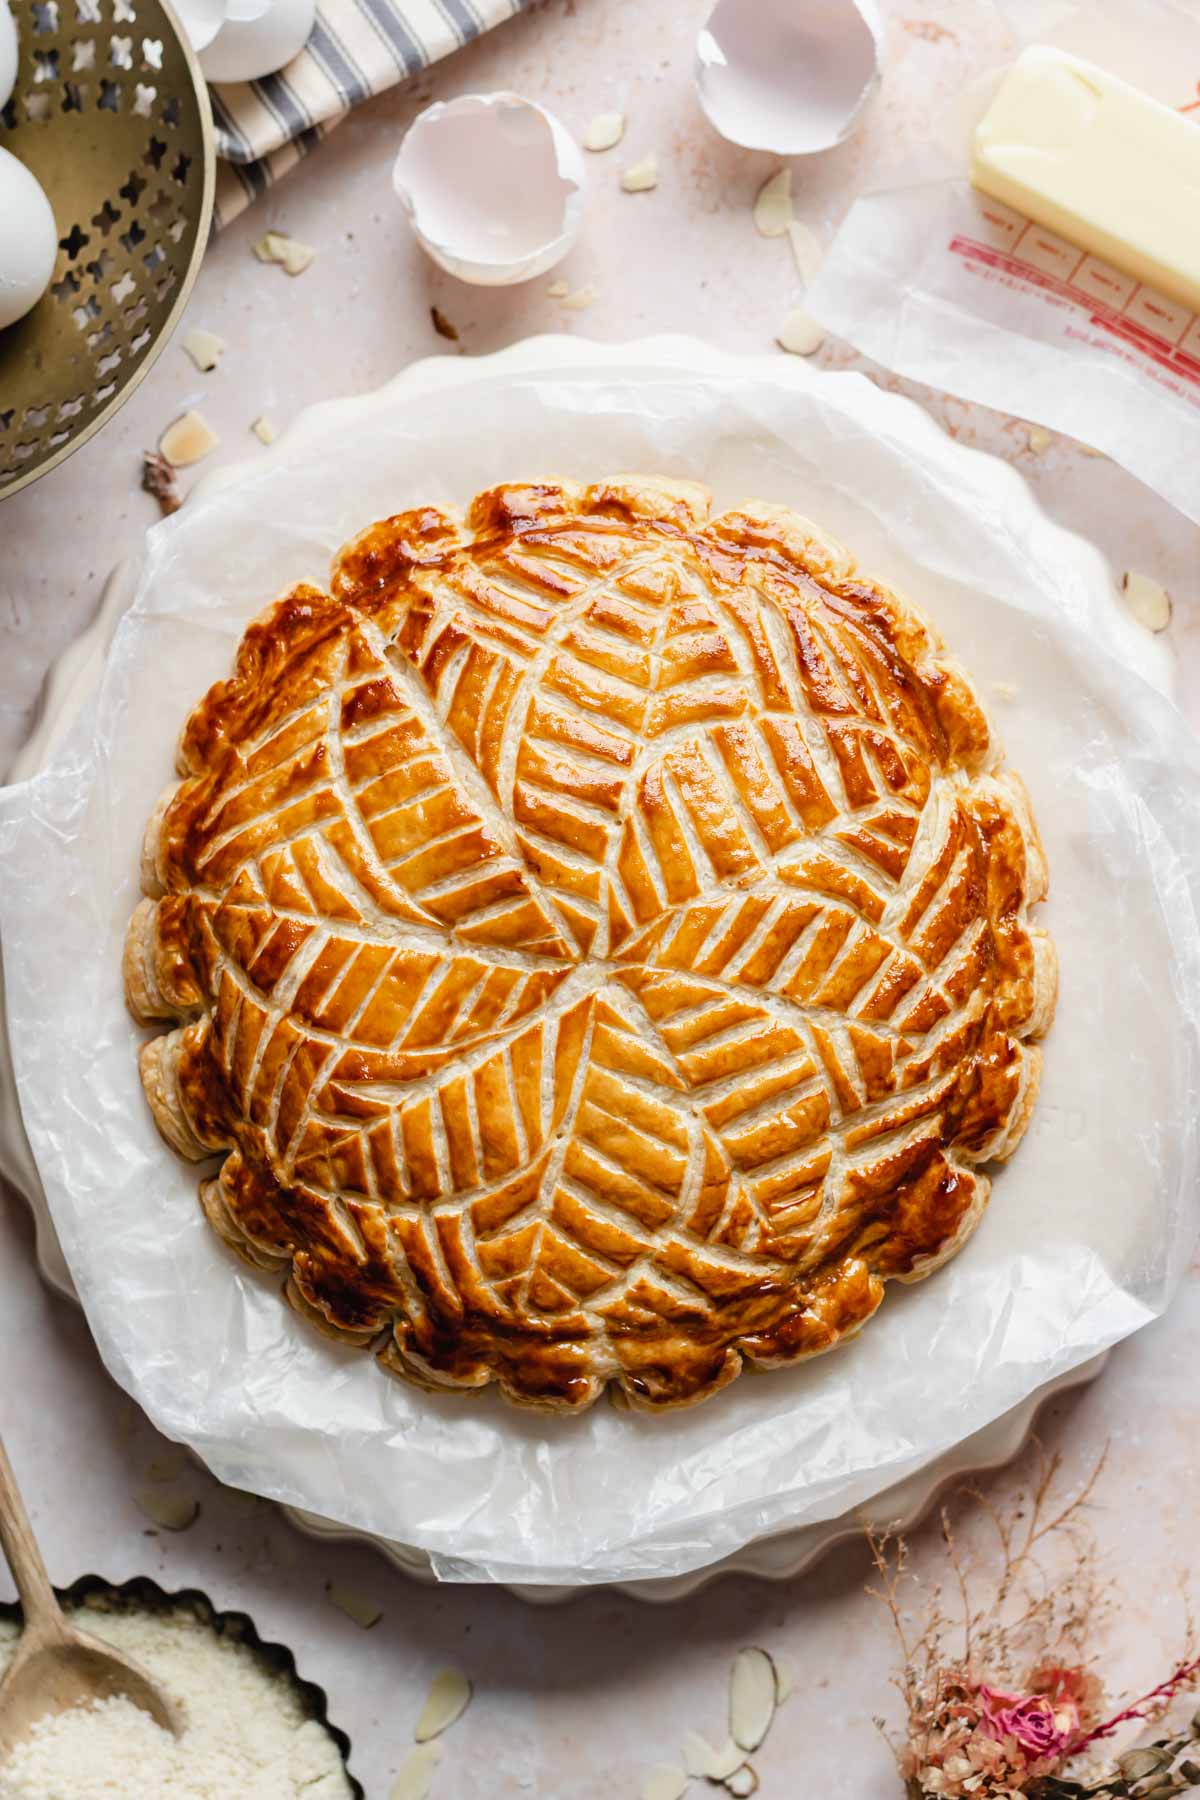 Overhead shot of a baked galette des rois to showcase the design.